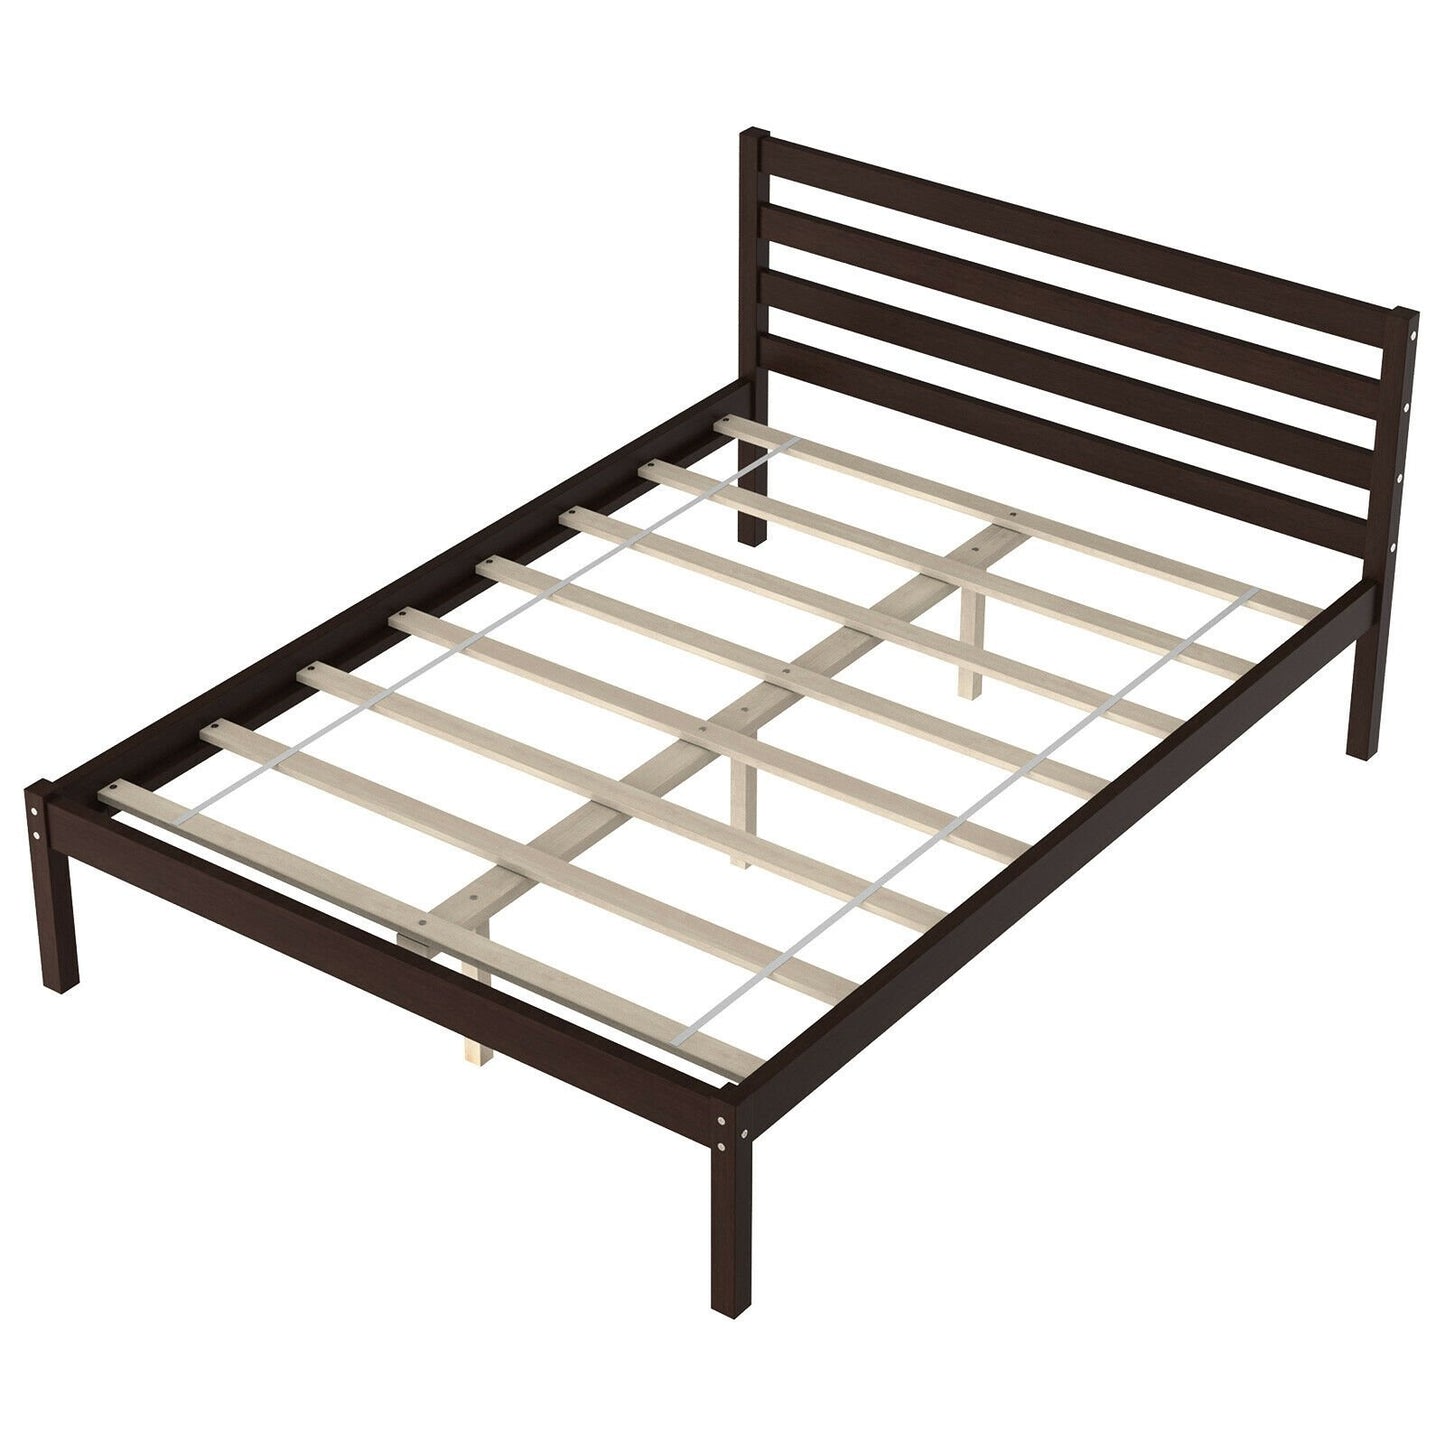 Full Size Bed frame Foundation with Solid Wooden Slat Suppor